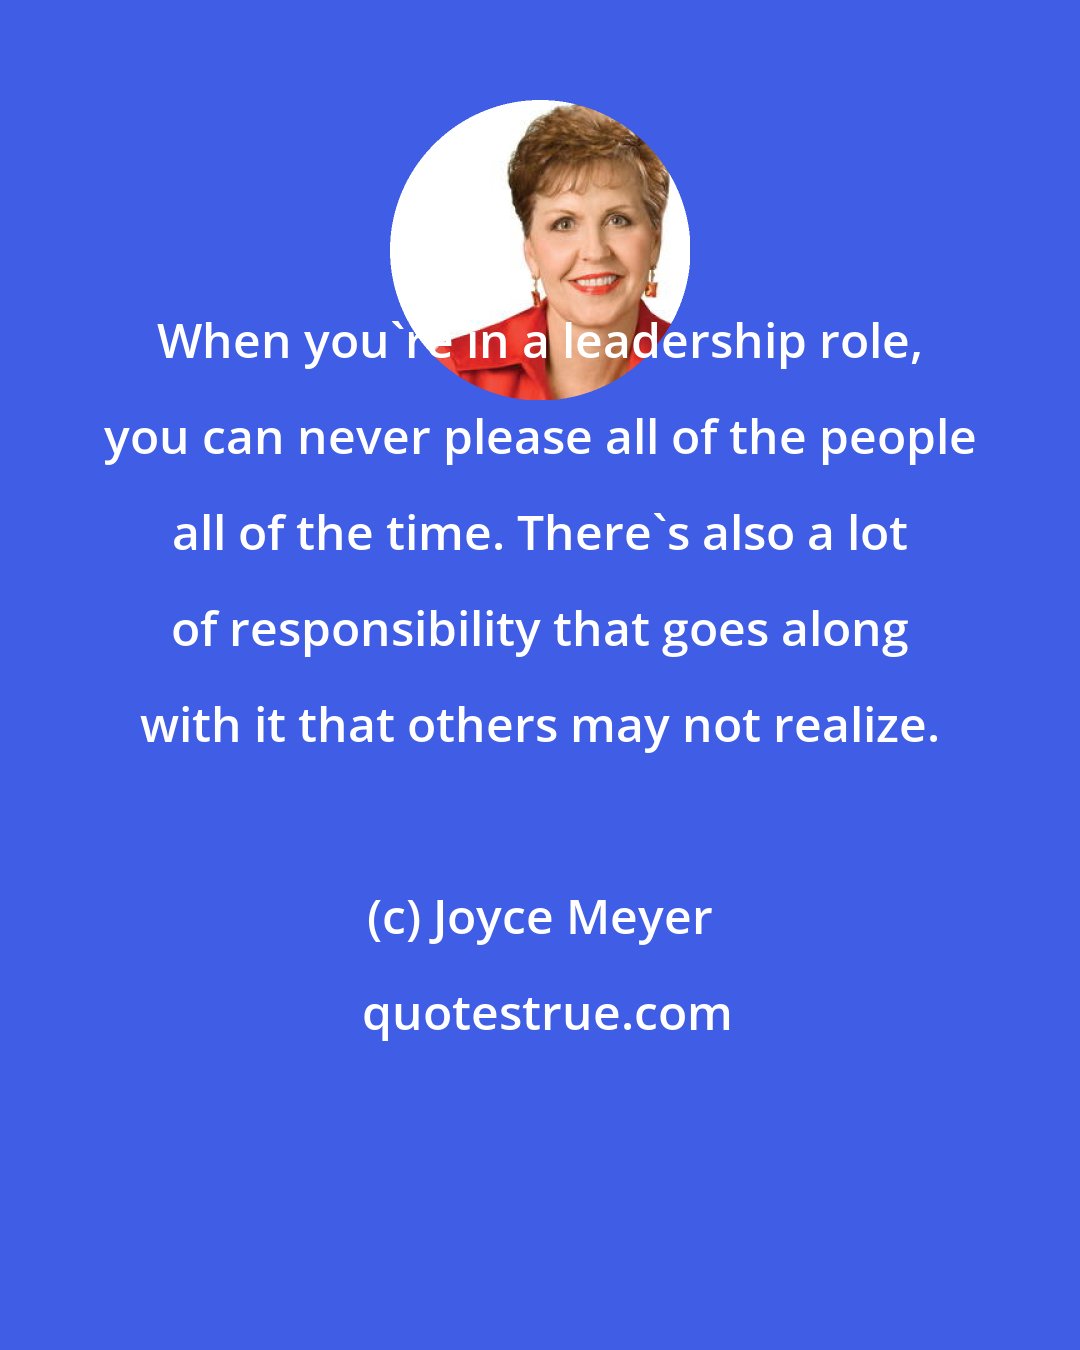 Joyce Meyer: When you're in a leadership role, you can never please all of the people all of the time. There's also a lot of responsibility that goes along with it that others may not realize.